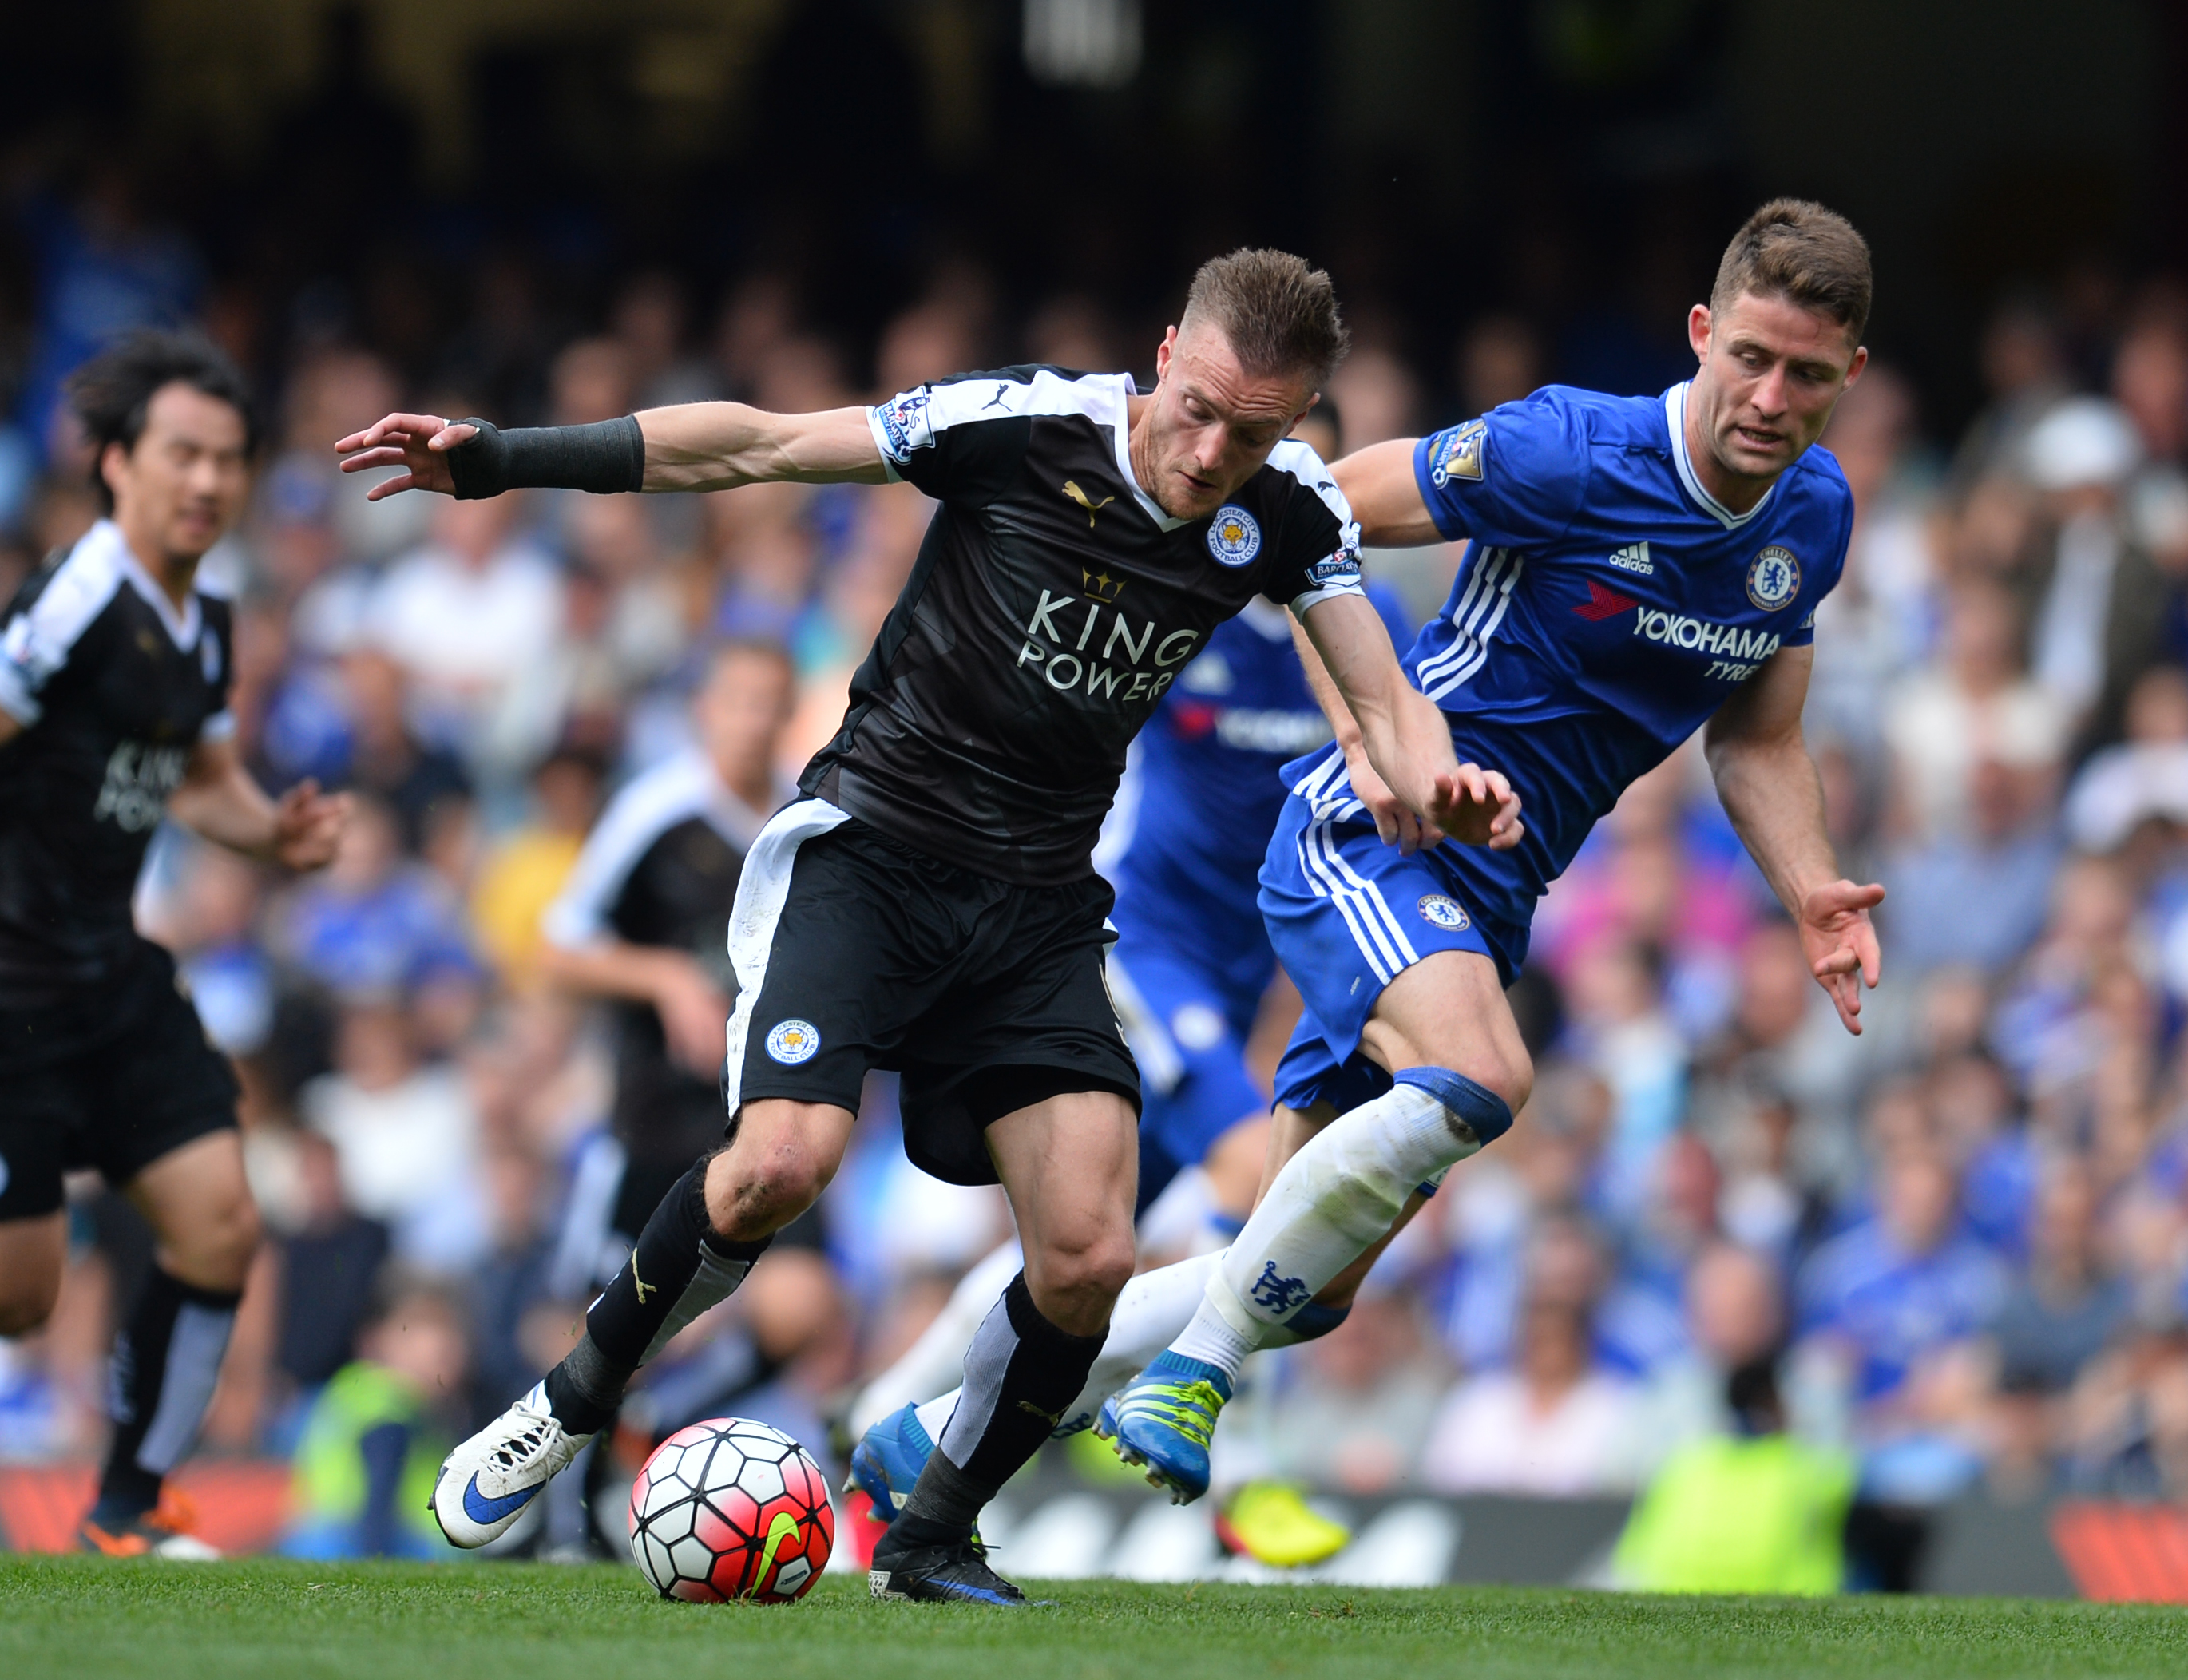 Leicester City's English striker Jamie Vardy (L) vies with Chelsea's English defender Gary Cahill during the English Premier League football match between Chelsea and Leicester City at Stamford Bridge in London on May 15, 2016. / AFP / GLYN KIRK / RESTRICTED TO EDITORIAL USE. No use with unauthorized audio, video, data, fixture lists, club/league logos or 'live' services. Online in-match use limited to 75 images, no video emulation. No use in betting, games or single club/league/player publications.  /         (Photo credit should read GLYN KIRK/AFP/Getty Images)